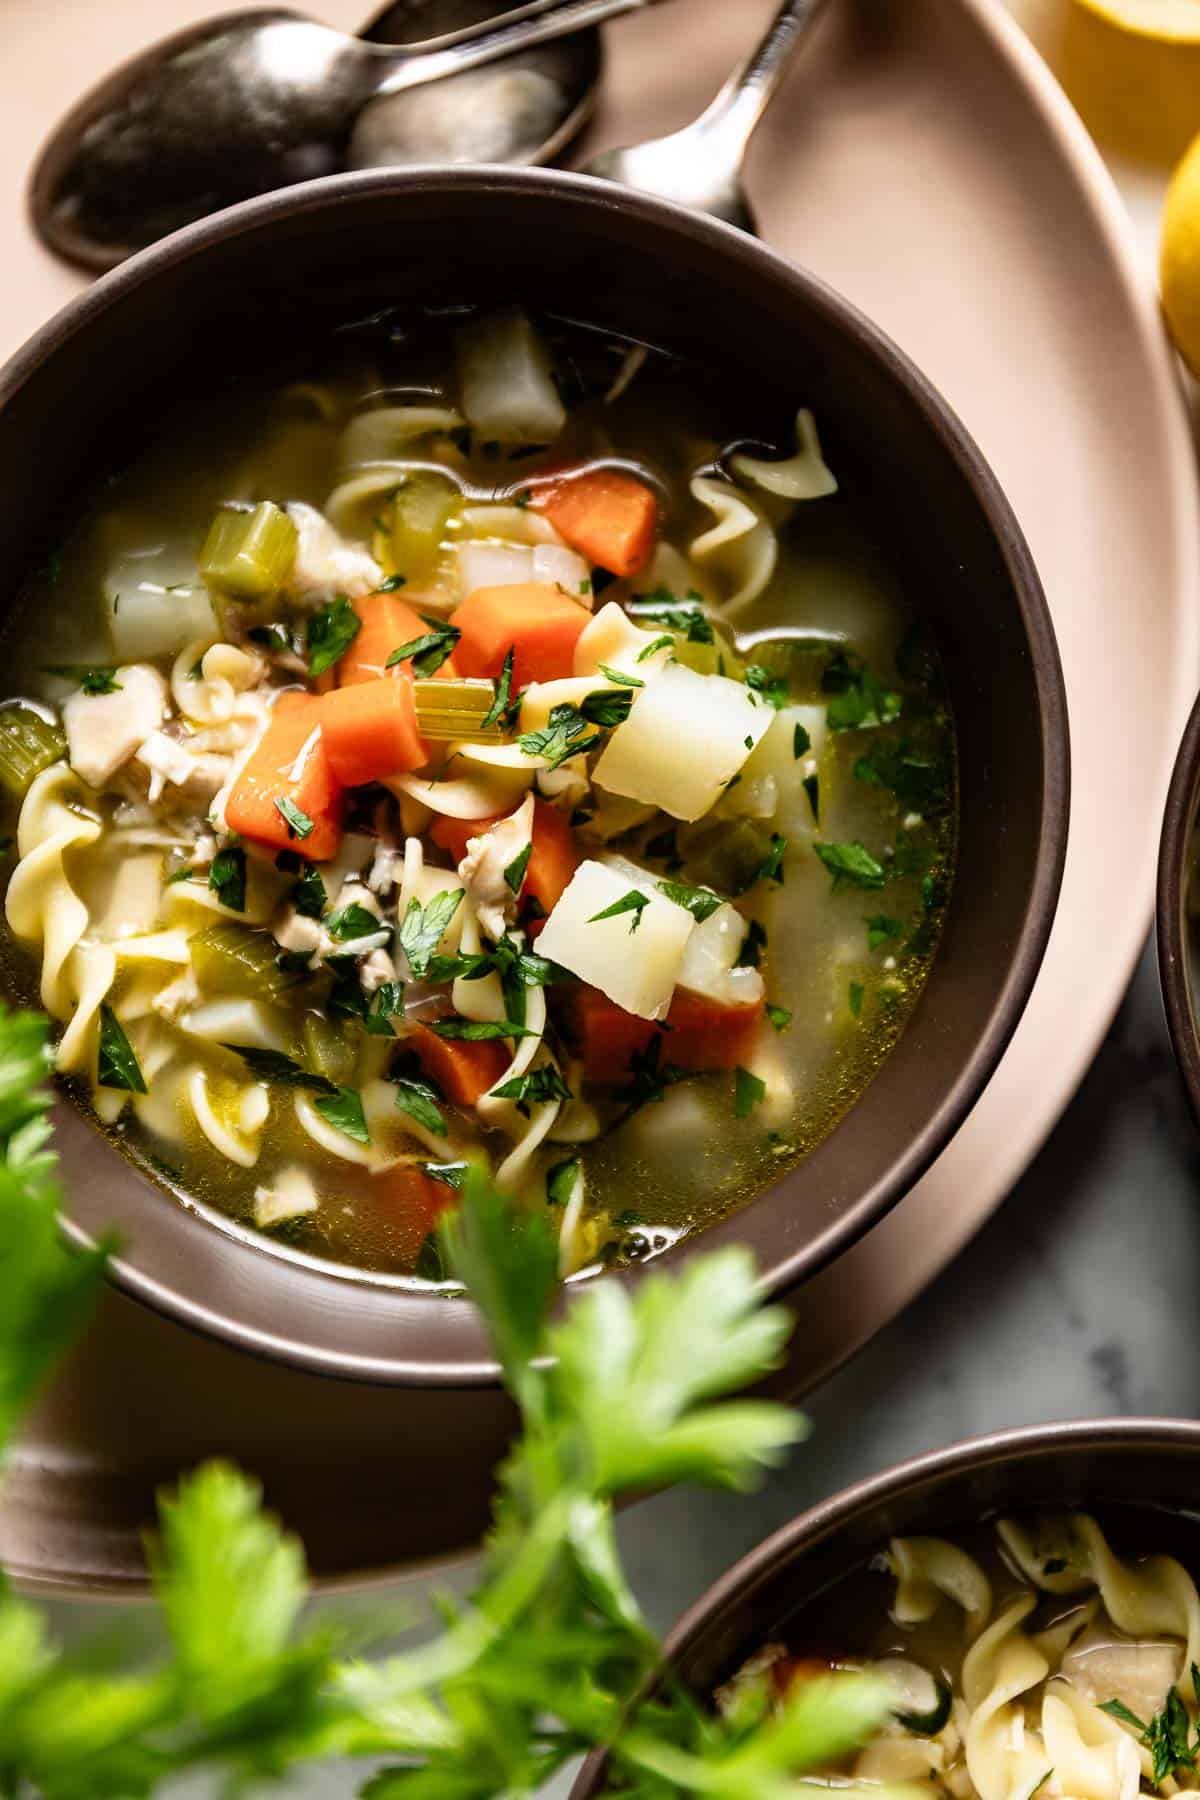 Hearty chicken soup with noodles and potatoes in a bowl from the top view.